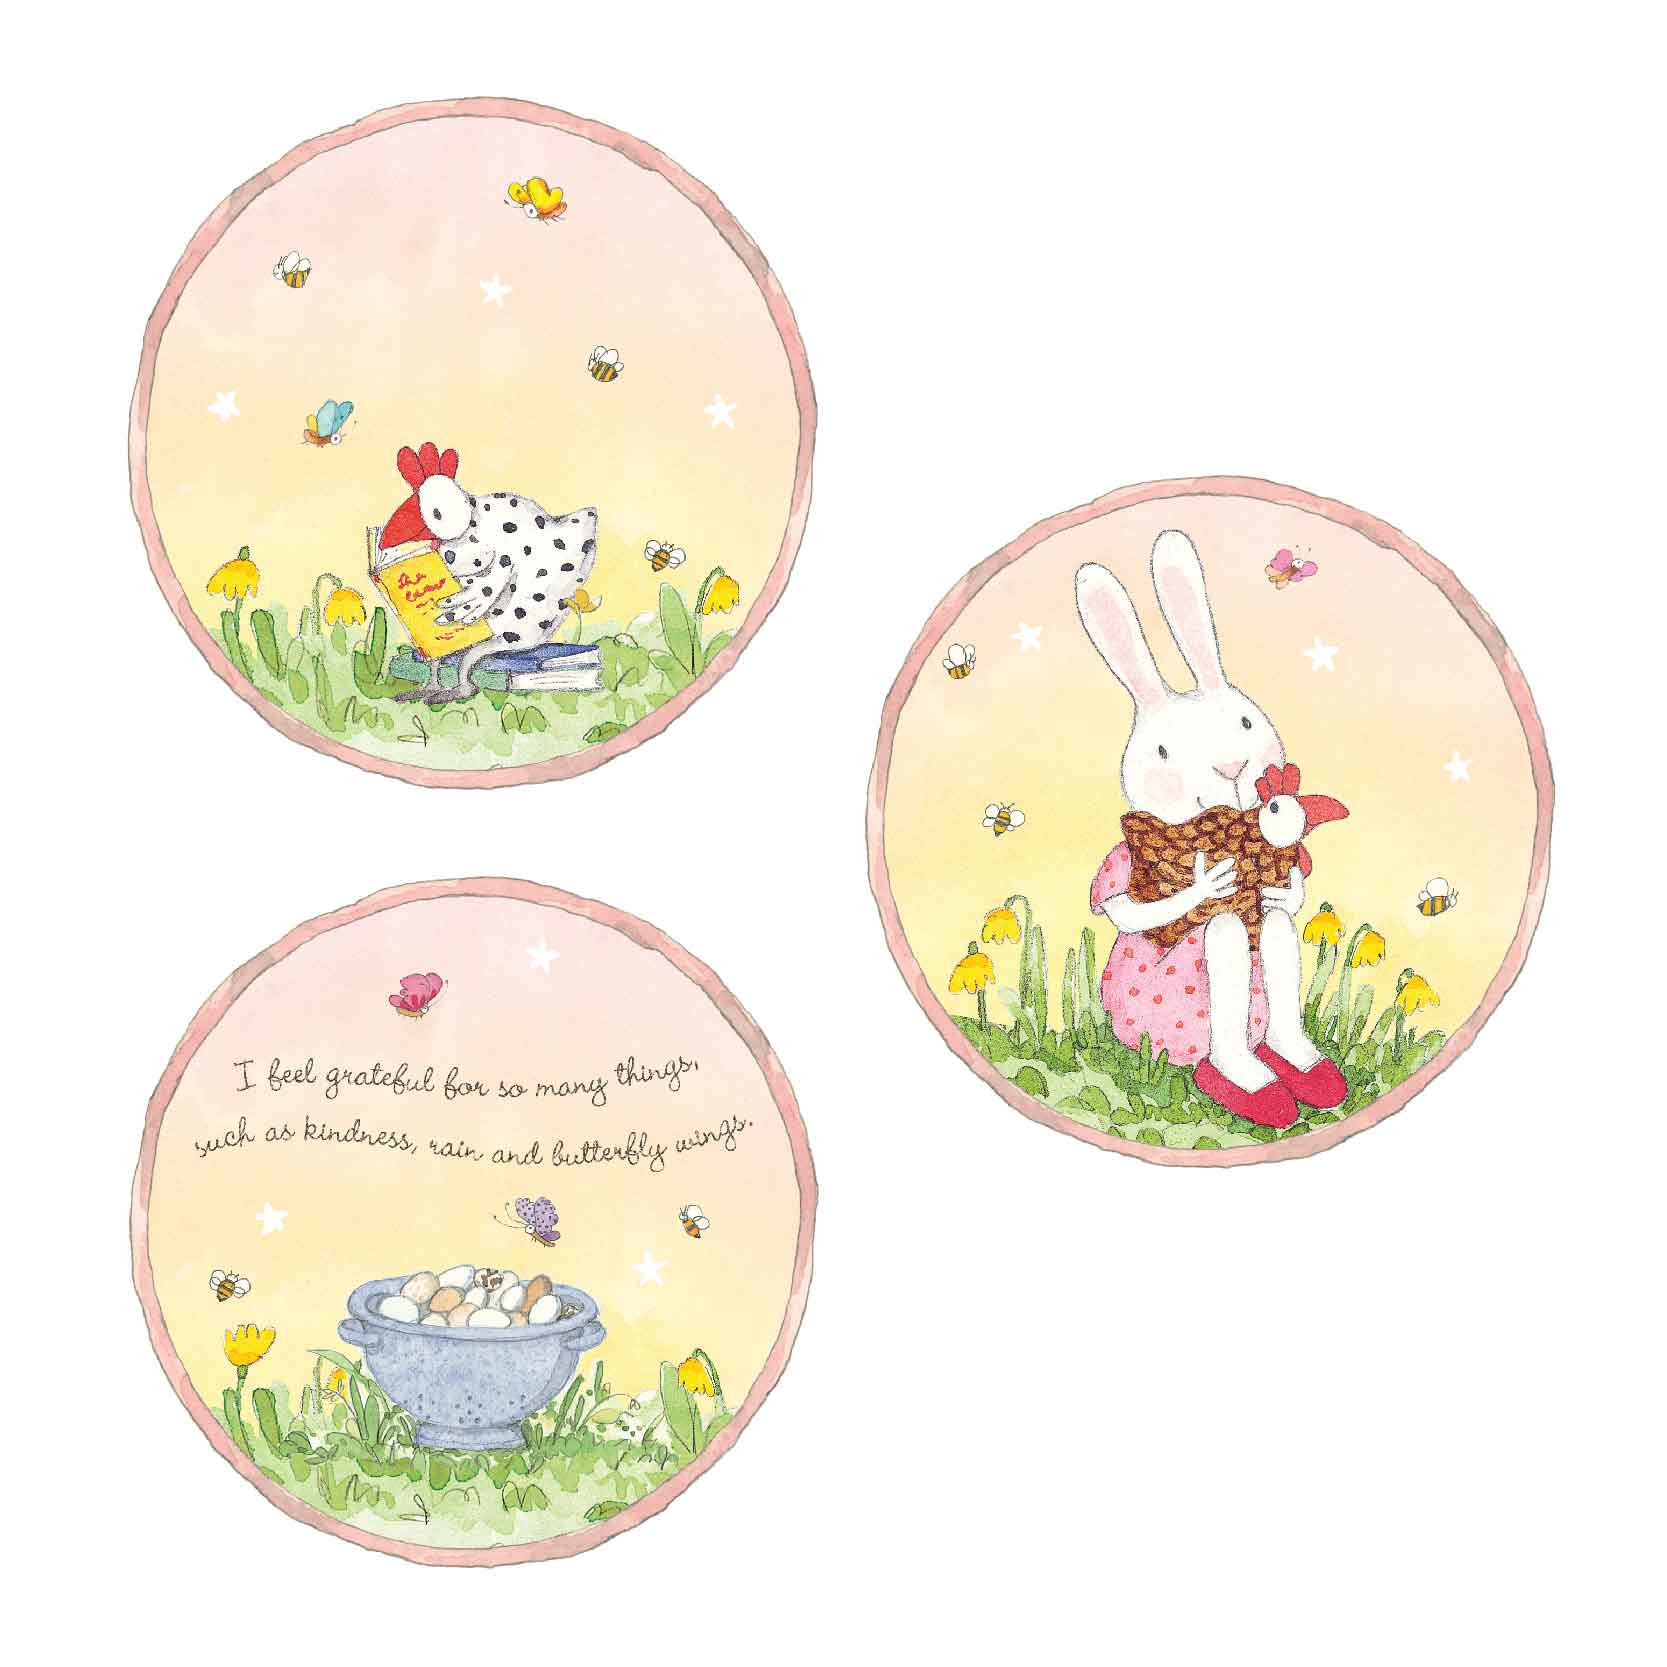 Ruby Red Shoes Large Garden Trio Wall Stickers; Three large round wall stickers. Each with a sunset scene on the grass with yellow flowers, bees and colourful butterflies. One sticker features Ruby, a white rabbit girl, in a pink dress with red dots, wearing her bright red shoes, holding a brown chicken who is looking up at her with its large round eye. Around her flutter 3 bright bees and a butterfly. One sticker features the white chicken with black spots sitting upon two blue coloured books and reading a yellow book with red writing on the cover. Around them is 3 bees and 2 butterflies. In the last sticker is a large metal colander filled with whole eggs in both white and shades of brown. There are two bees and two butterflies in this image, as well as the text. "I feel grateful for so many things, such as kindness, rain and butterfly wings.'